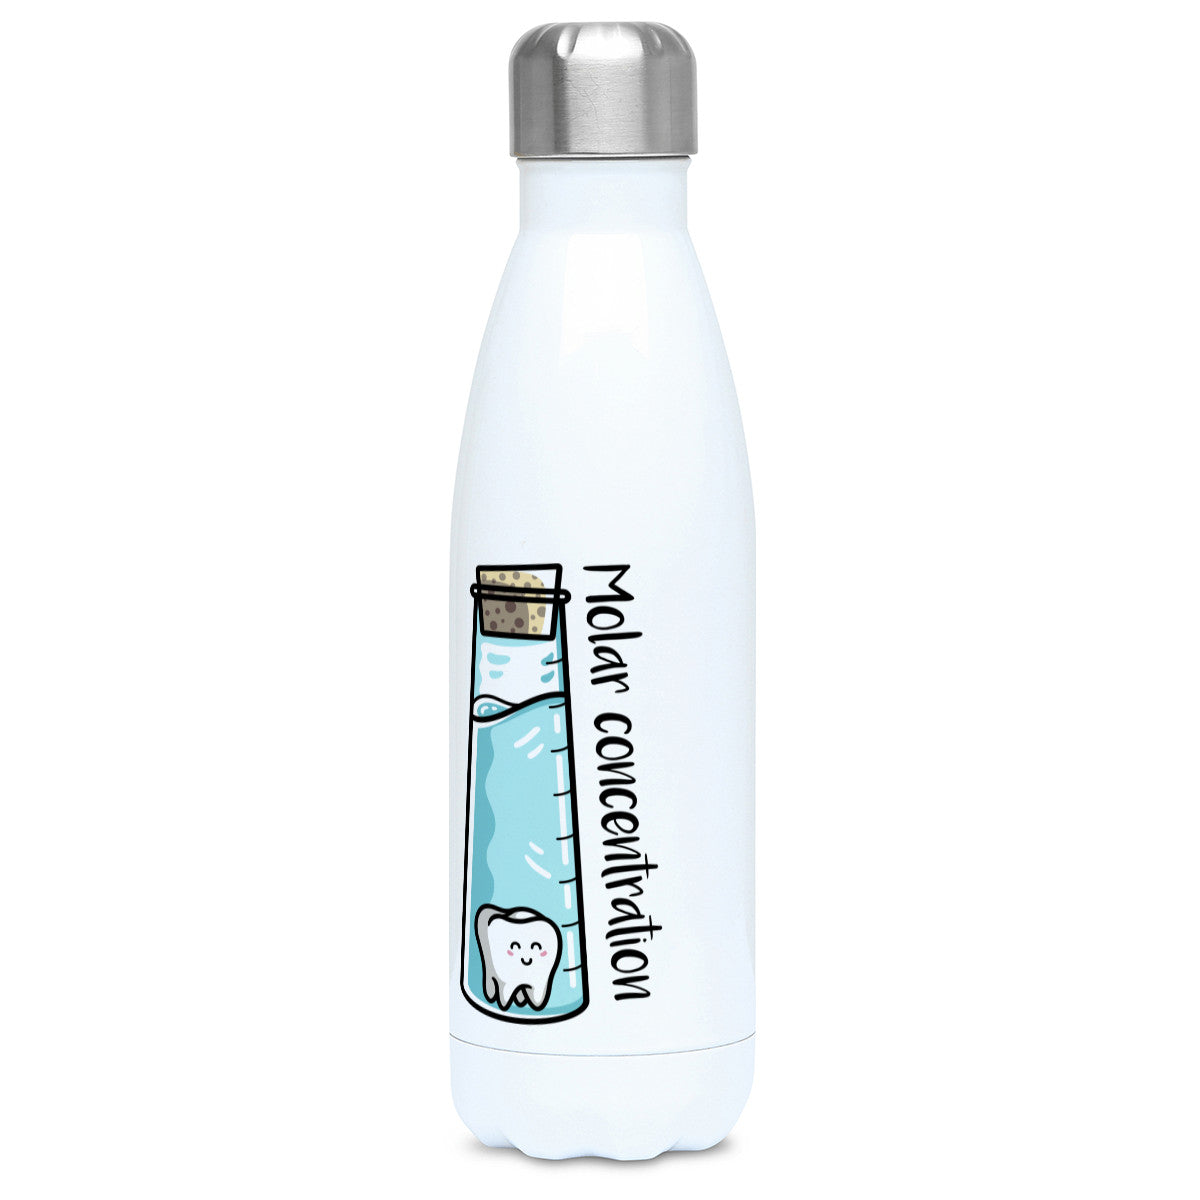 A corked chemistry vessel of liquid containing a molar tooth design on a white metal insulated drinks bottle, lid off